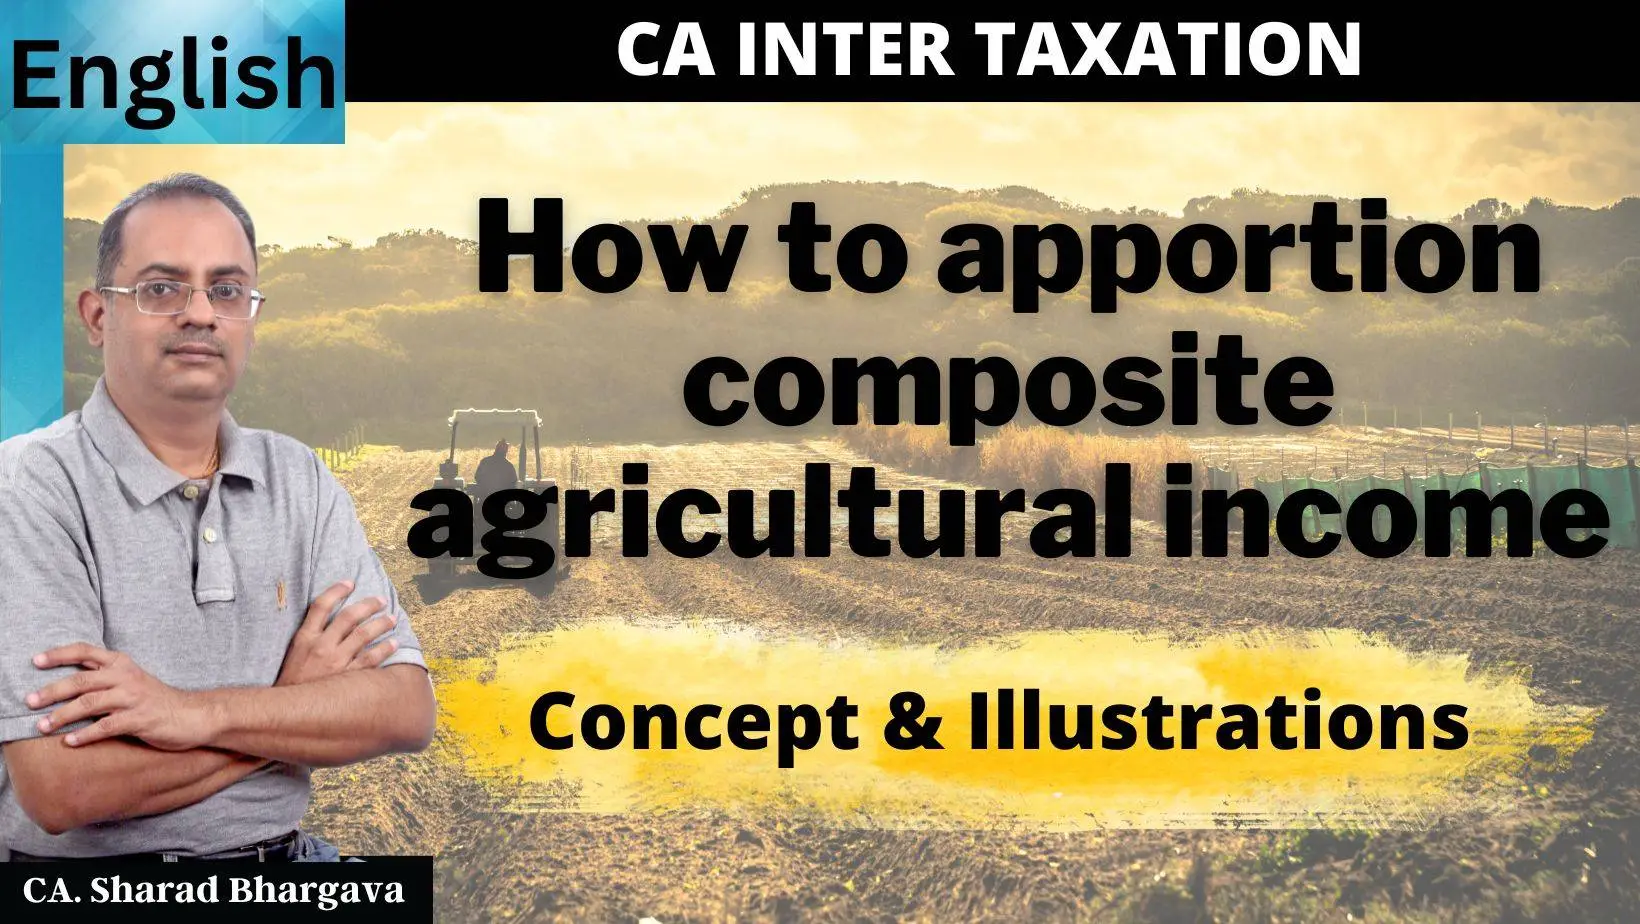 (English) / Apportion composite agricultural income as exempt & taxable income / CA. Sharad Bhargava